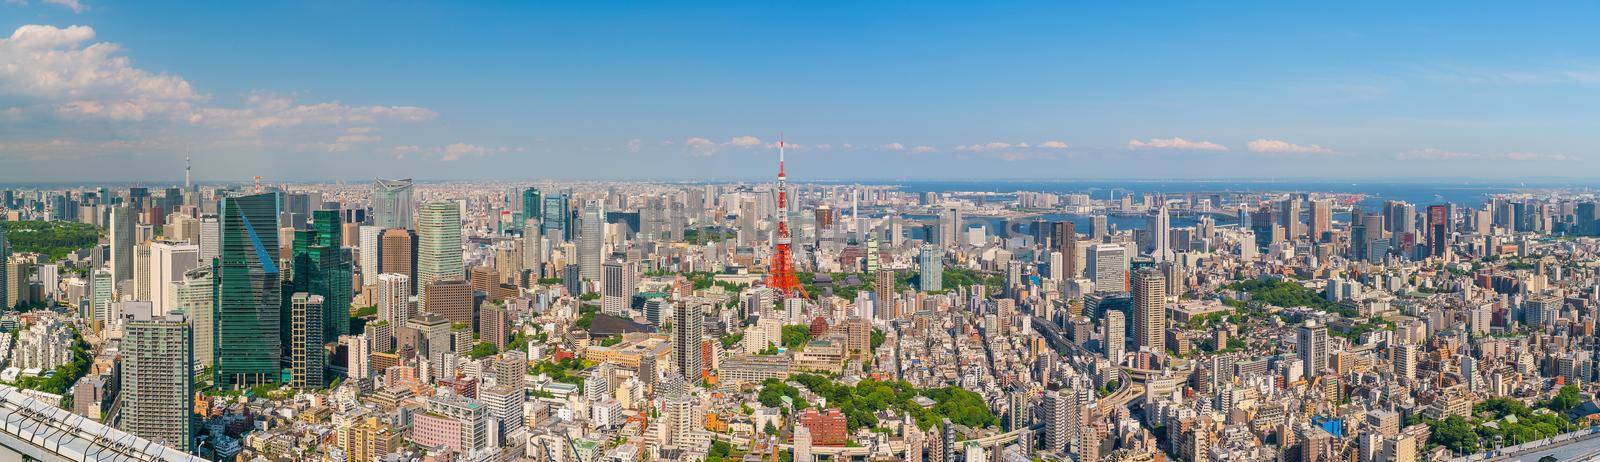 Tokyo skyline  with Tokyo Tower by f11photo